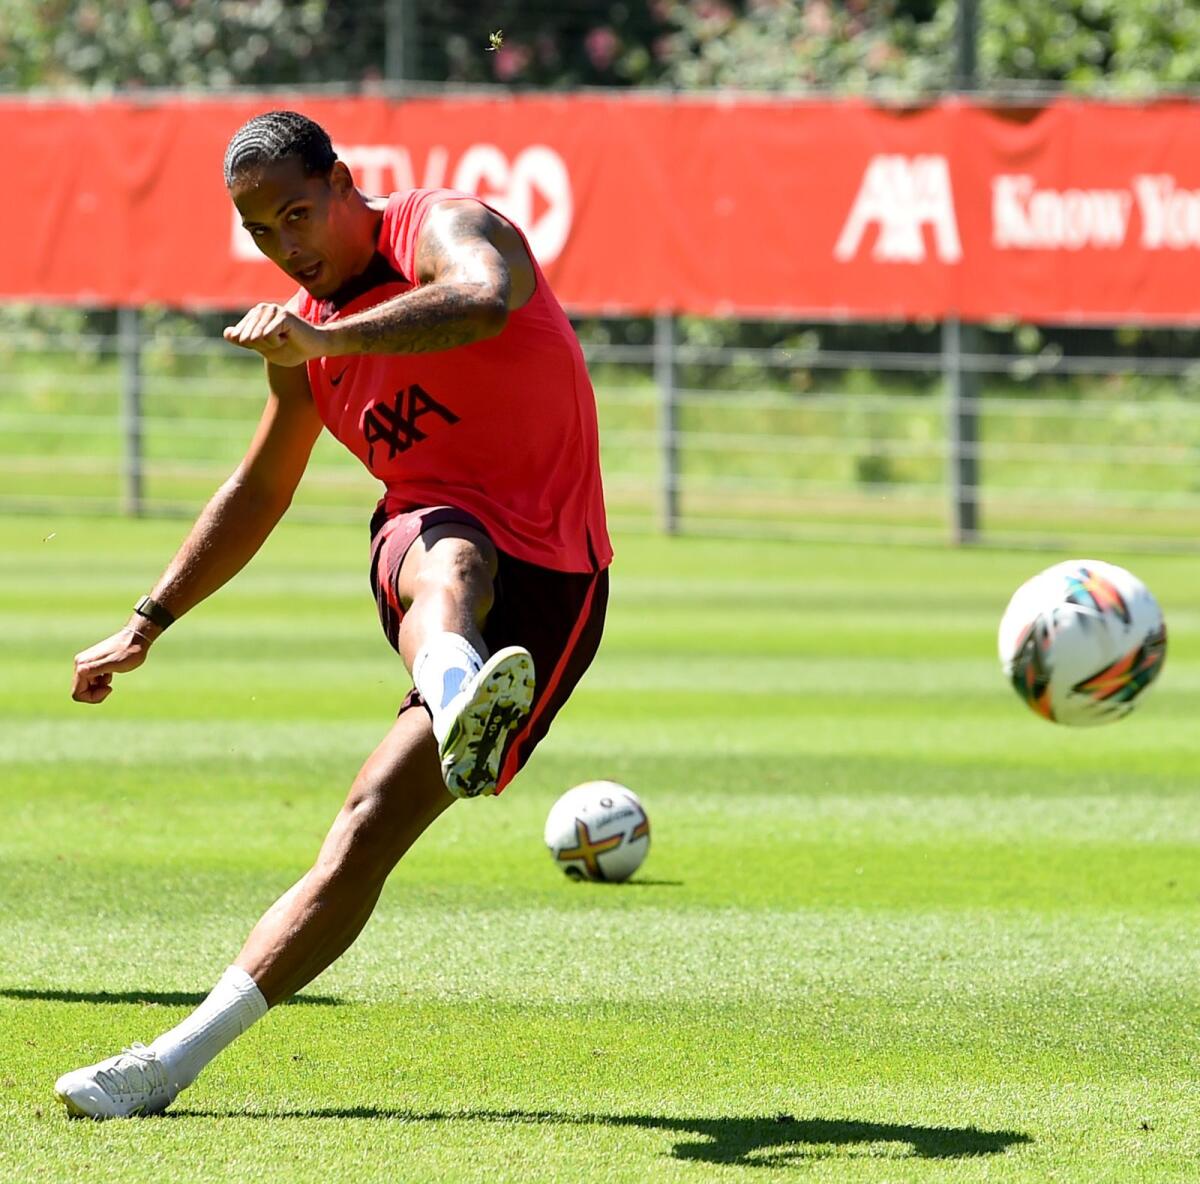 Liverpool's Virgil van Dijk during a training session in Austria. — Liverpool FC Twitter